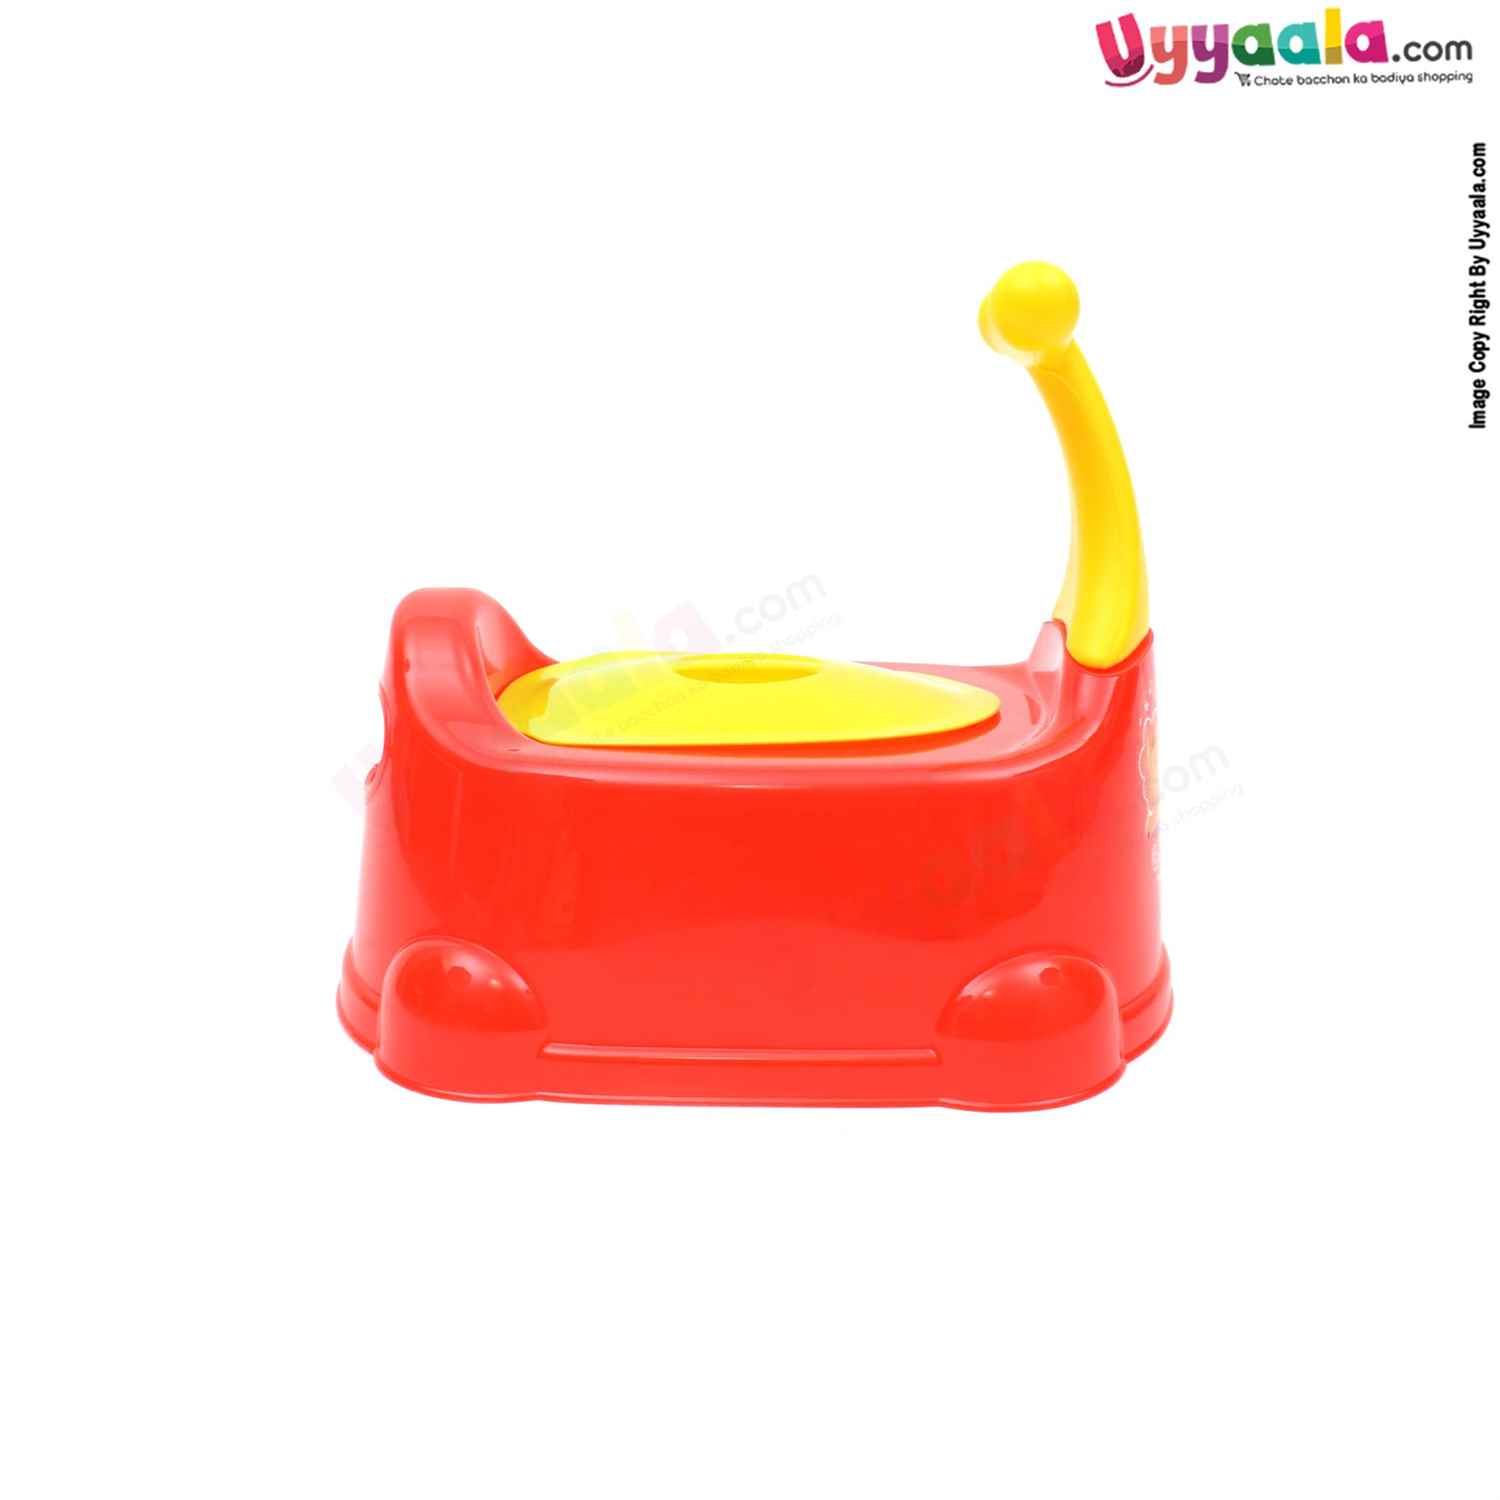 JOYFUL Baby Potty Training Seat, Scooter Style with Lid for 5+m Age - Red